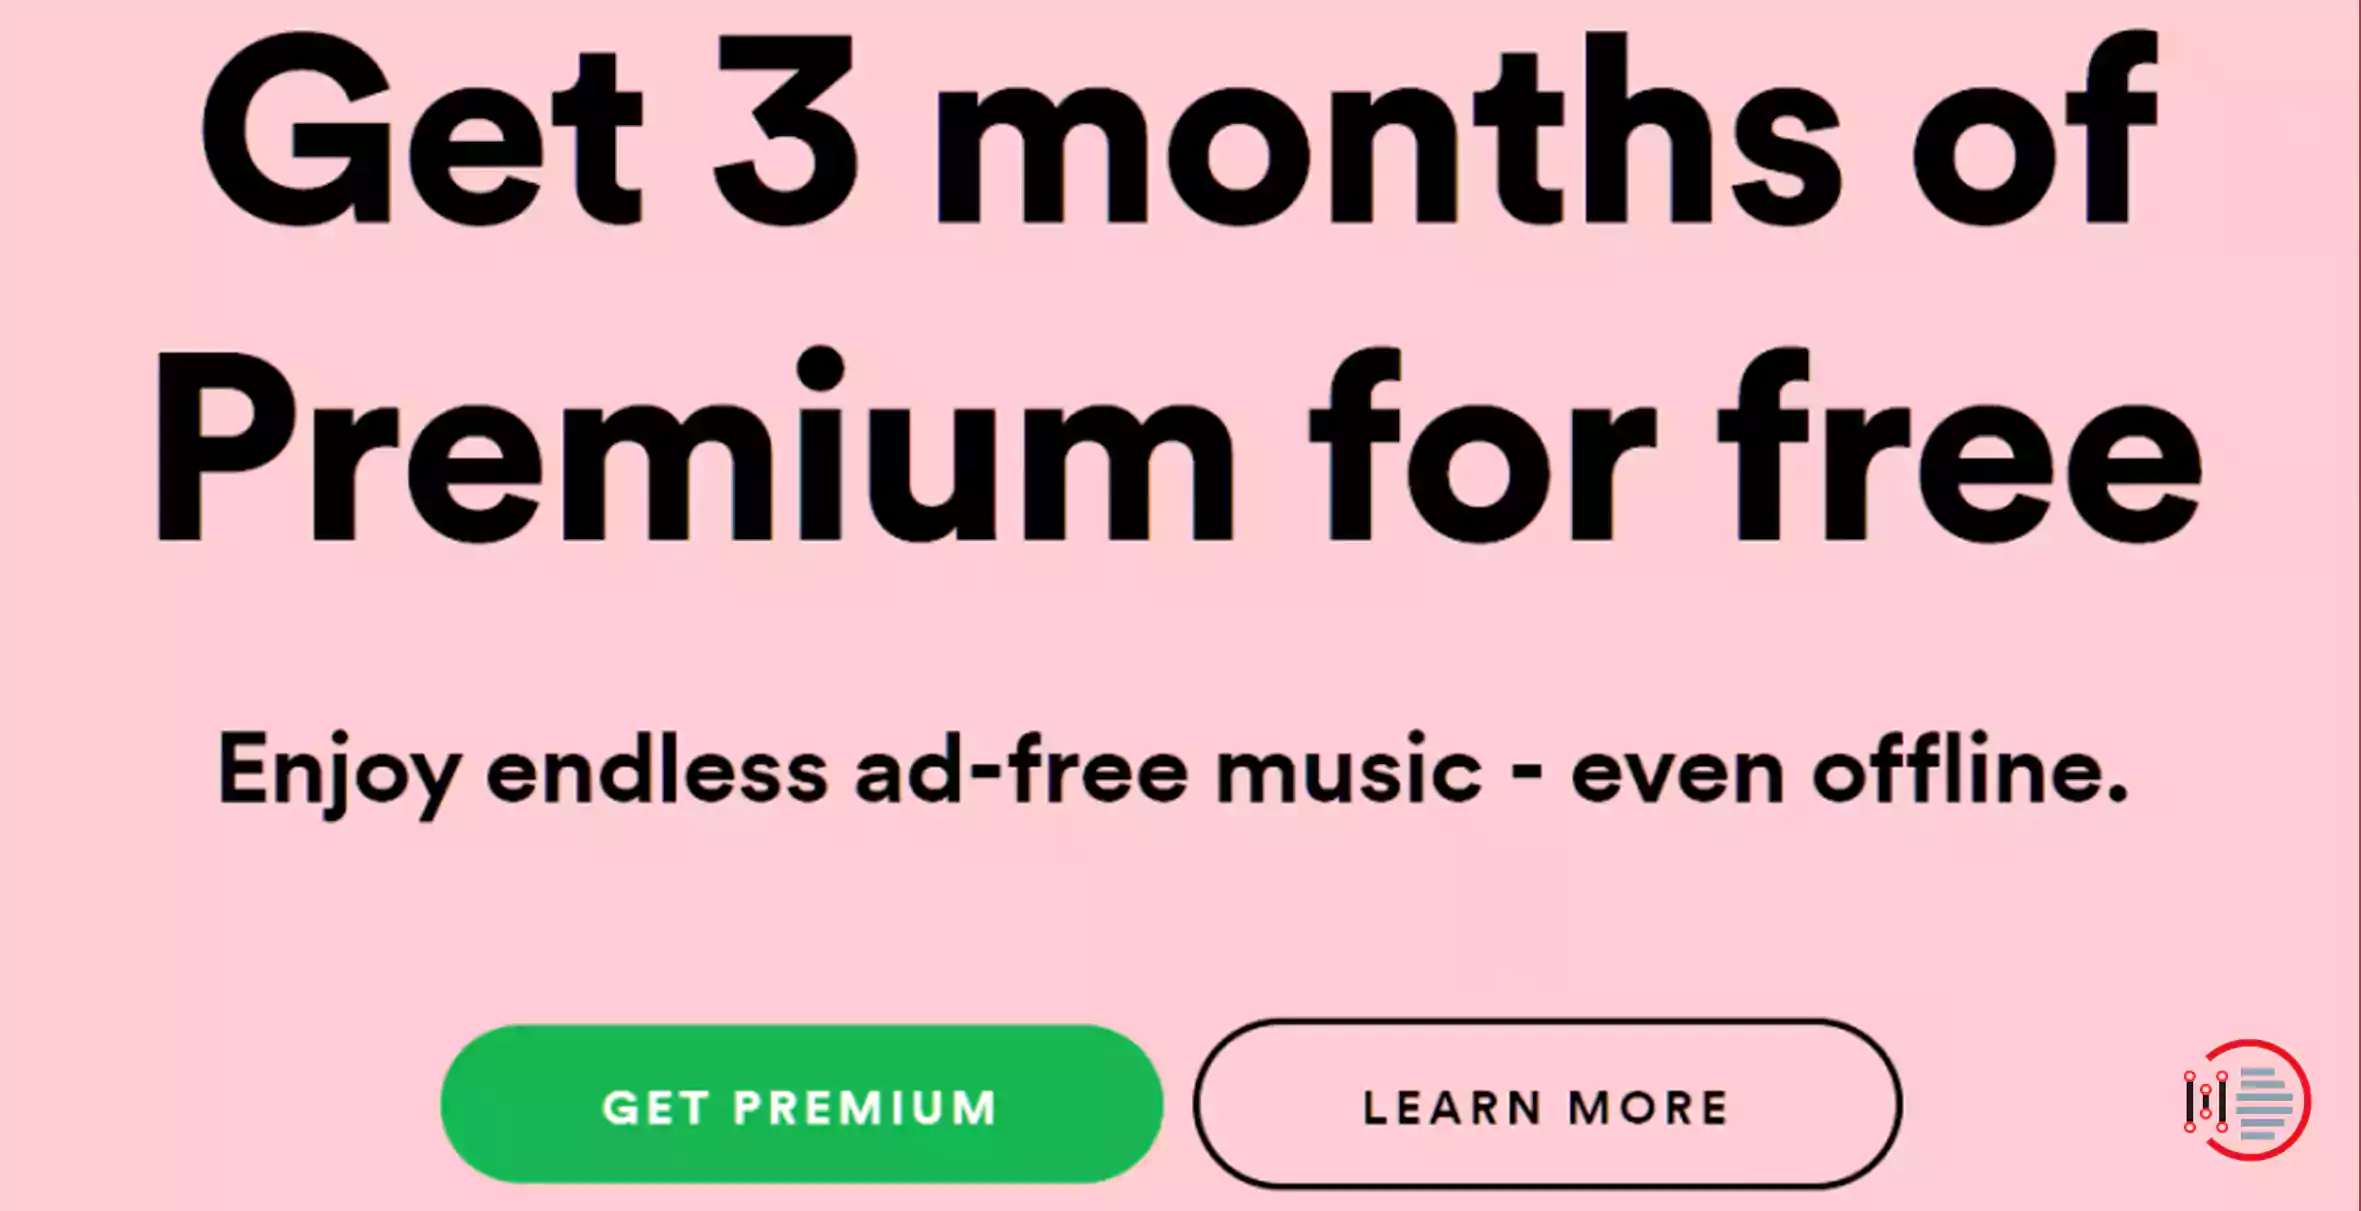 Using 90-days Spotify premium from different trial accounts